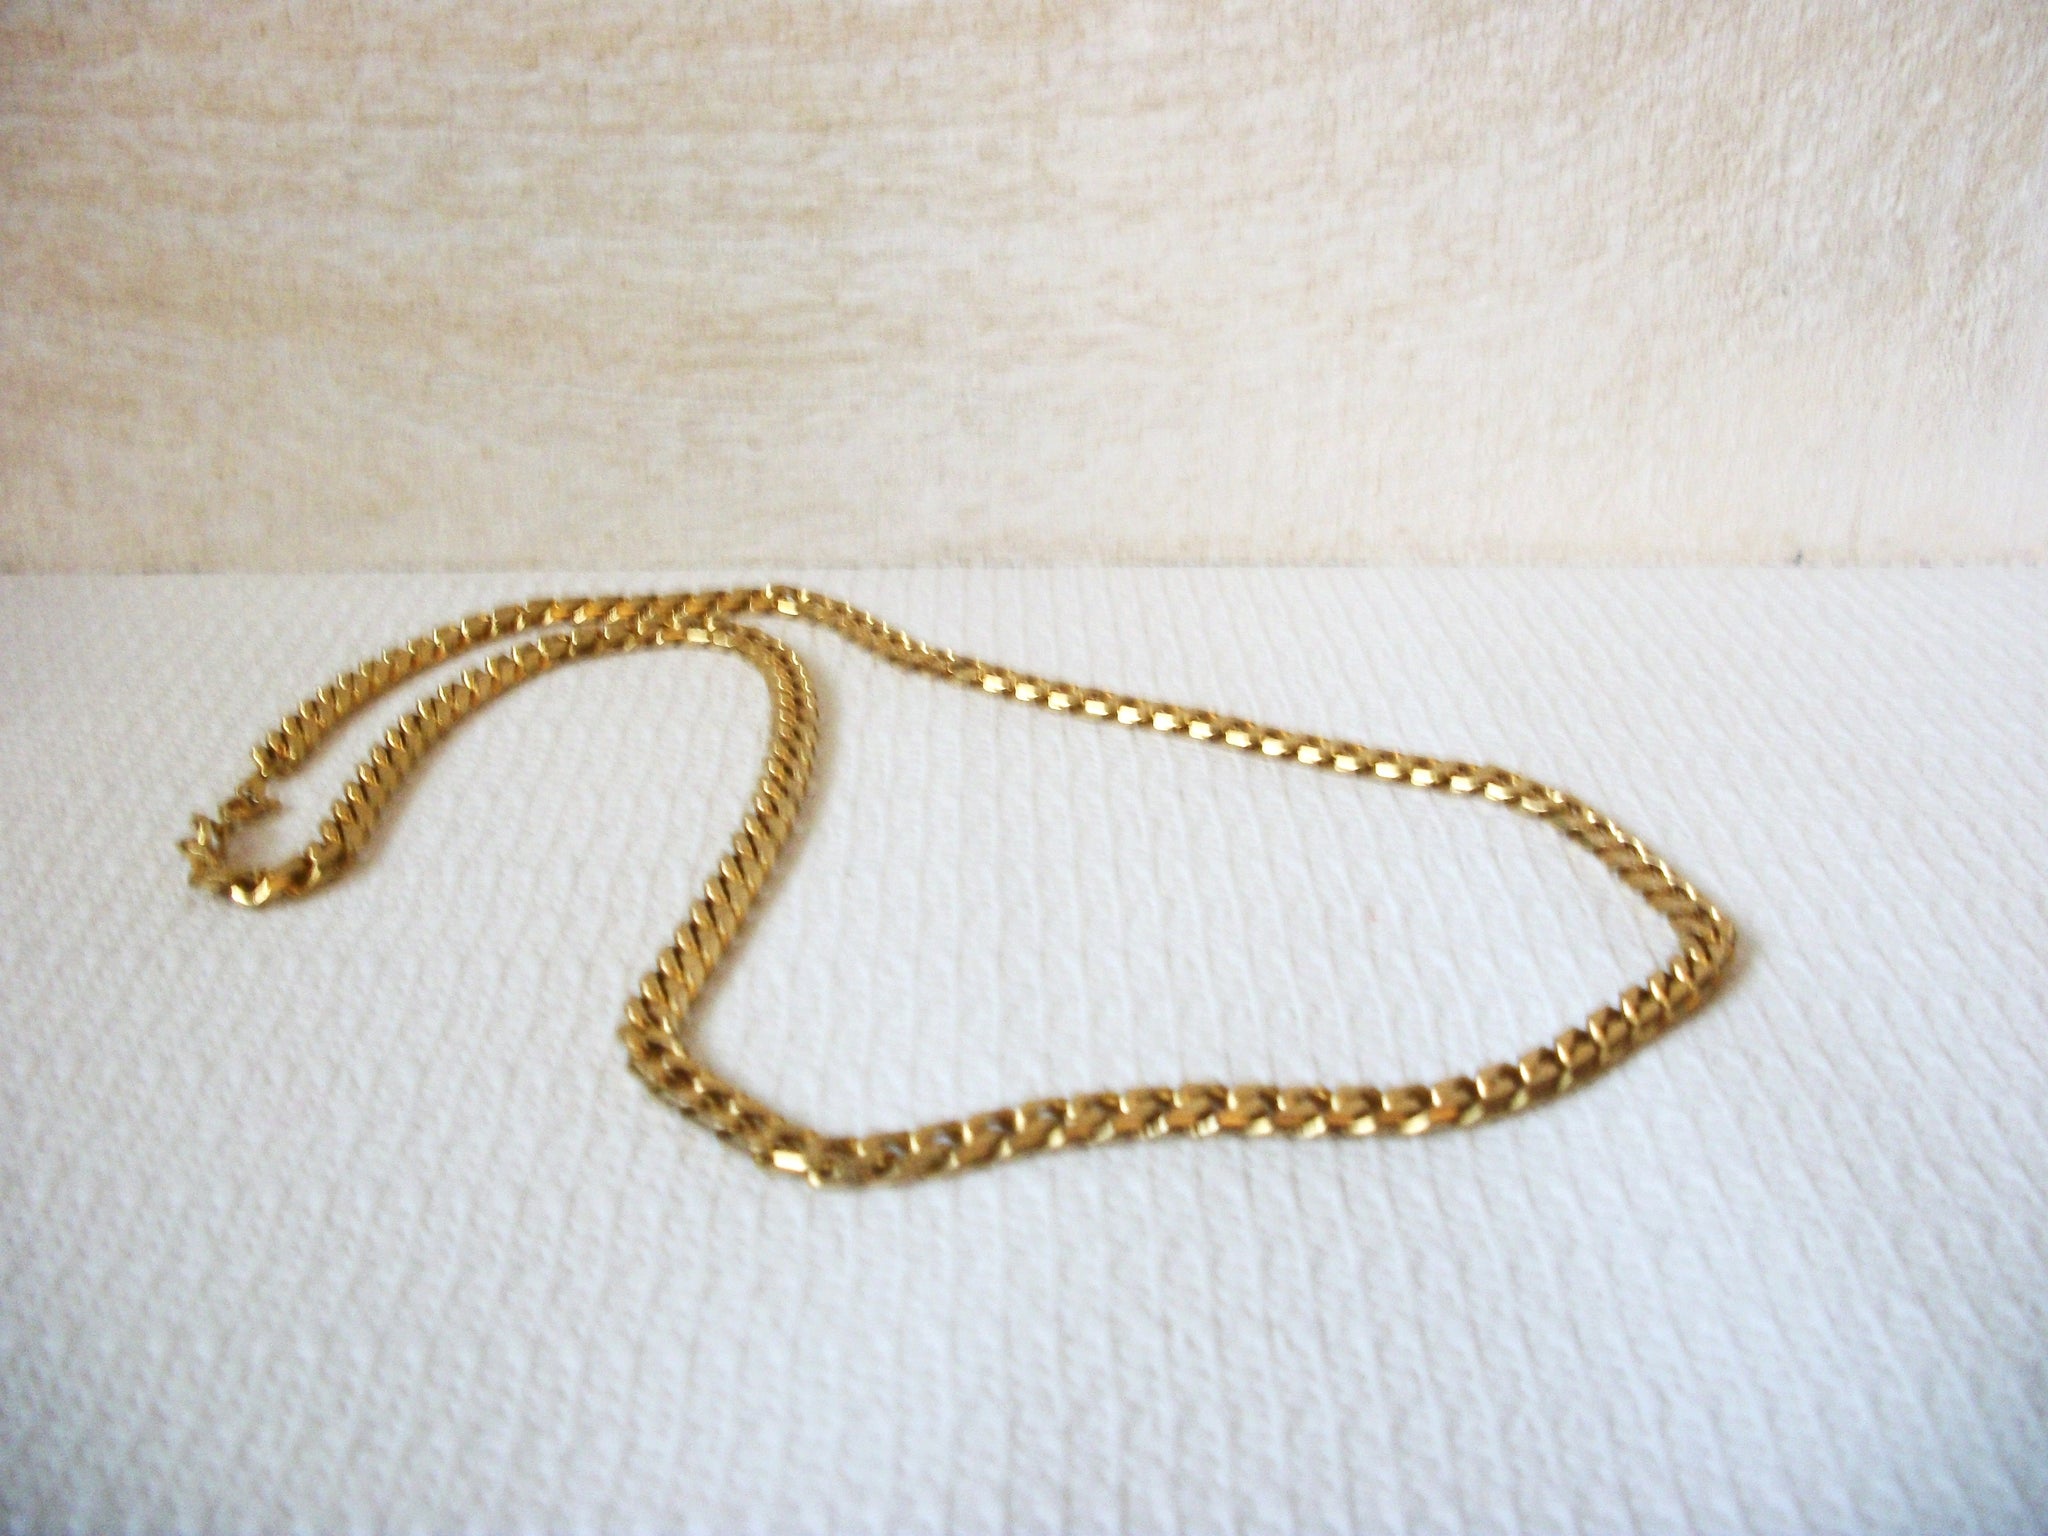 24 Inch Gold Toned Vintage Chain Necklace 52320